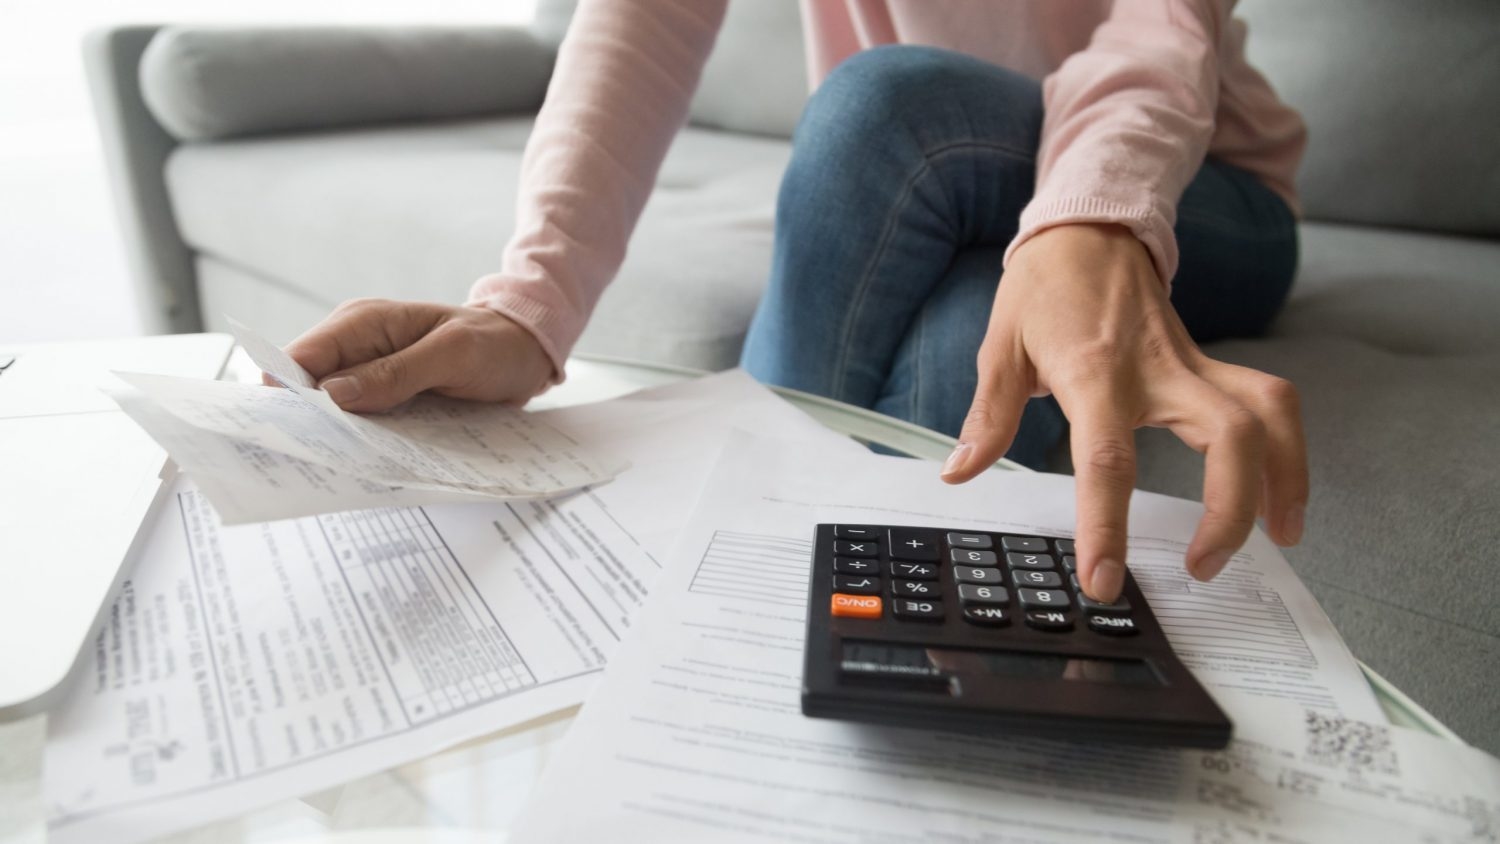 Pile of paper bills while woman calculates payment on calculator